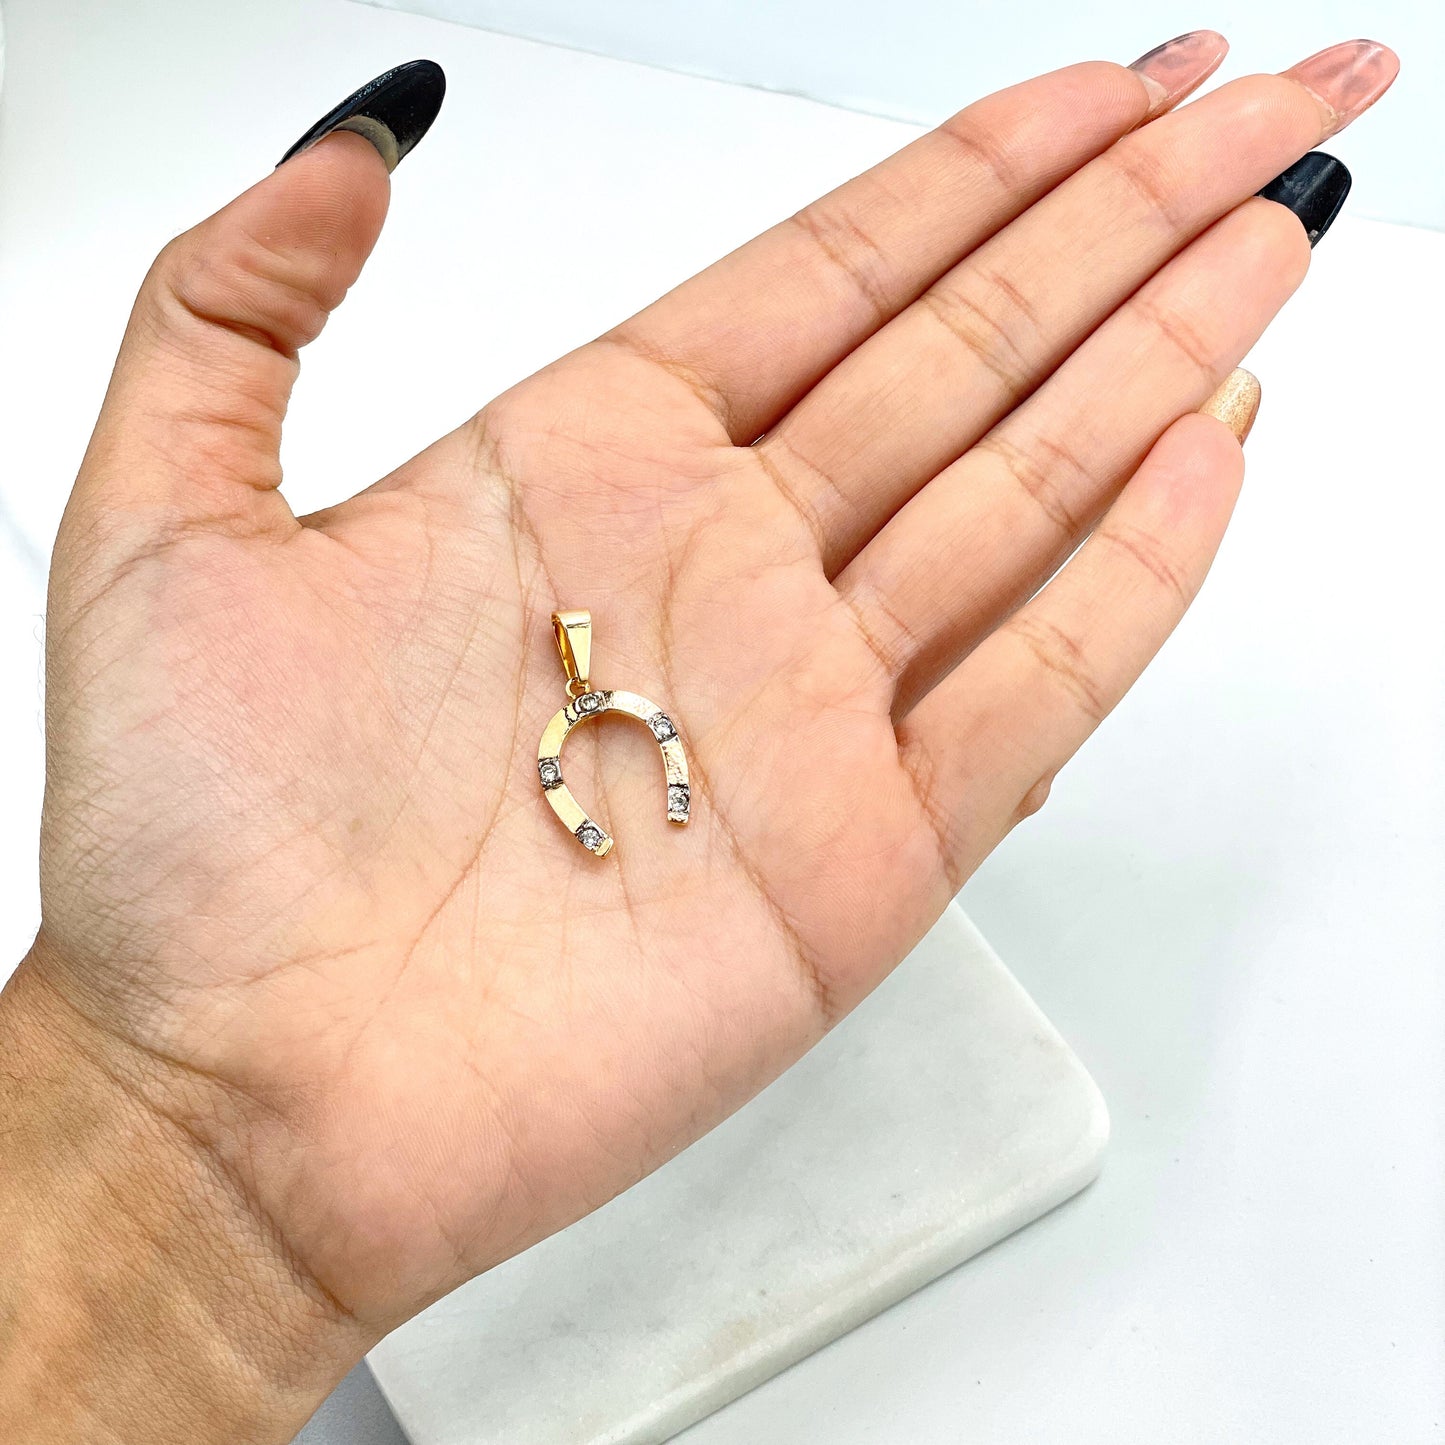 18k Gold Filled Gold Lucky Horseshoe Shape with Clear Cubic Zirconia Charm Pendant, Wholesale Jewelry Making Supplies